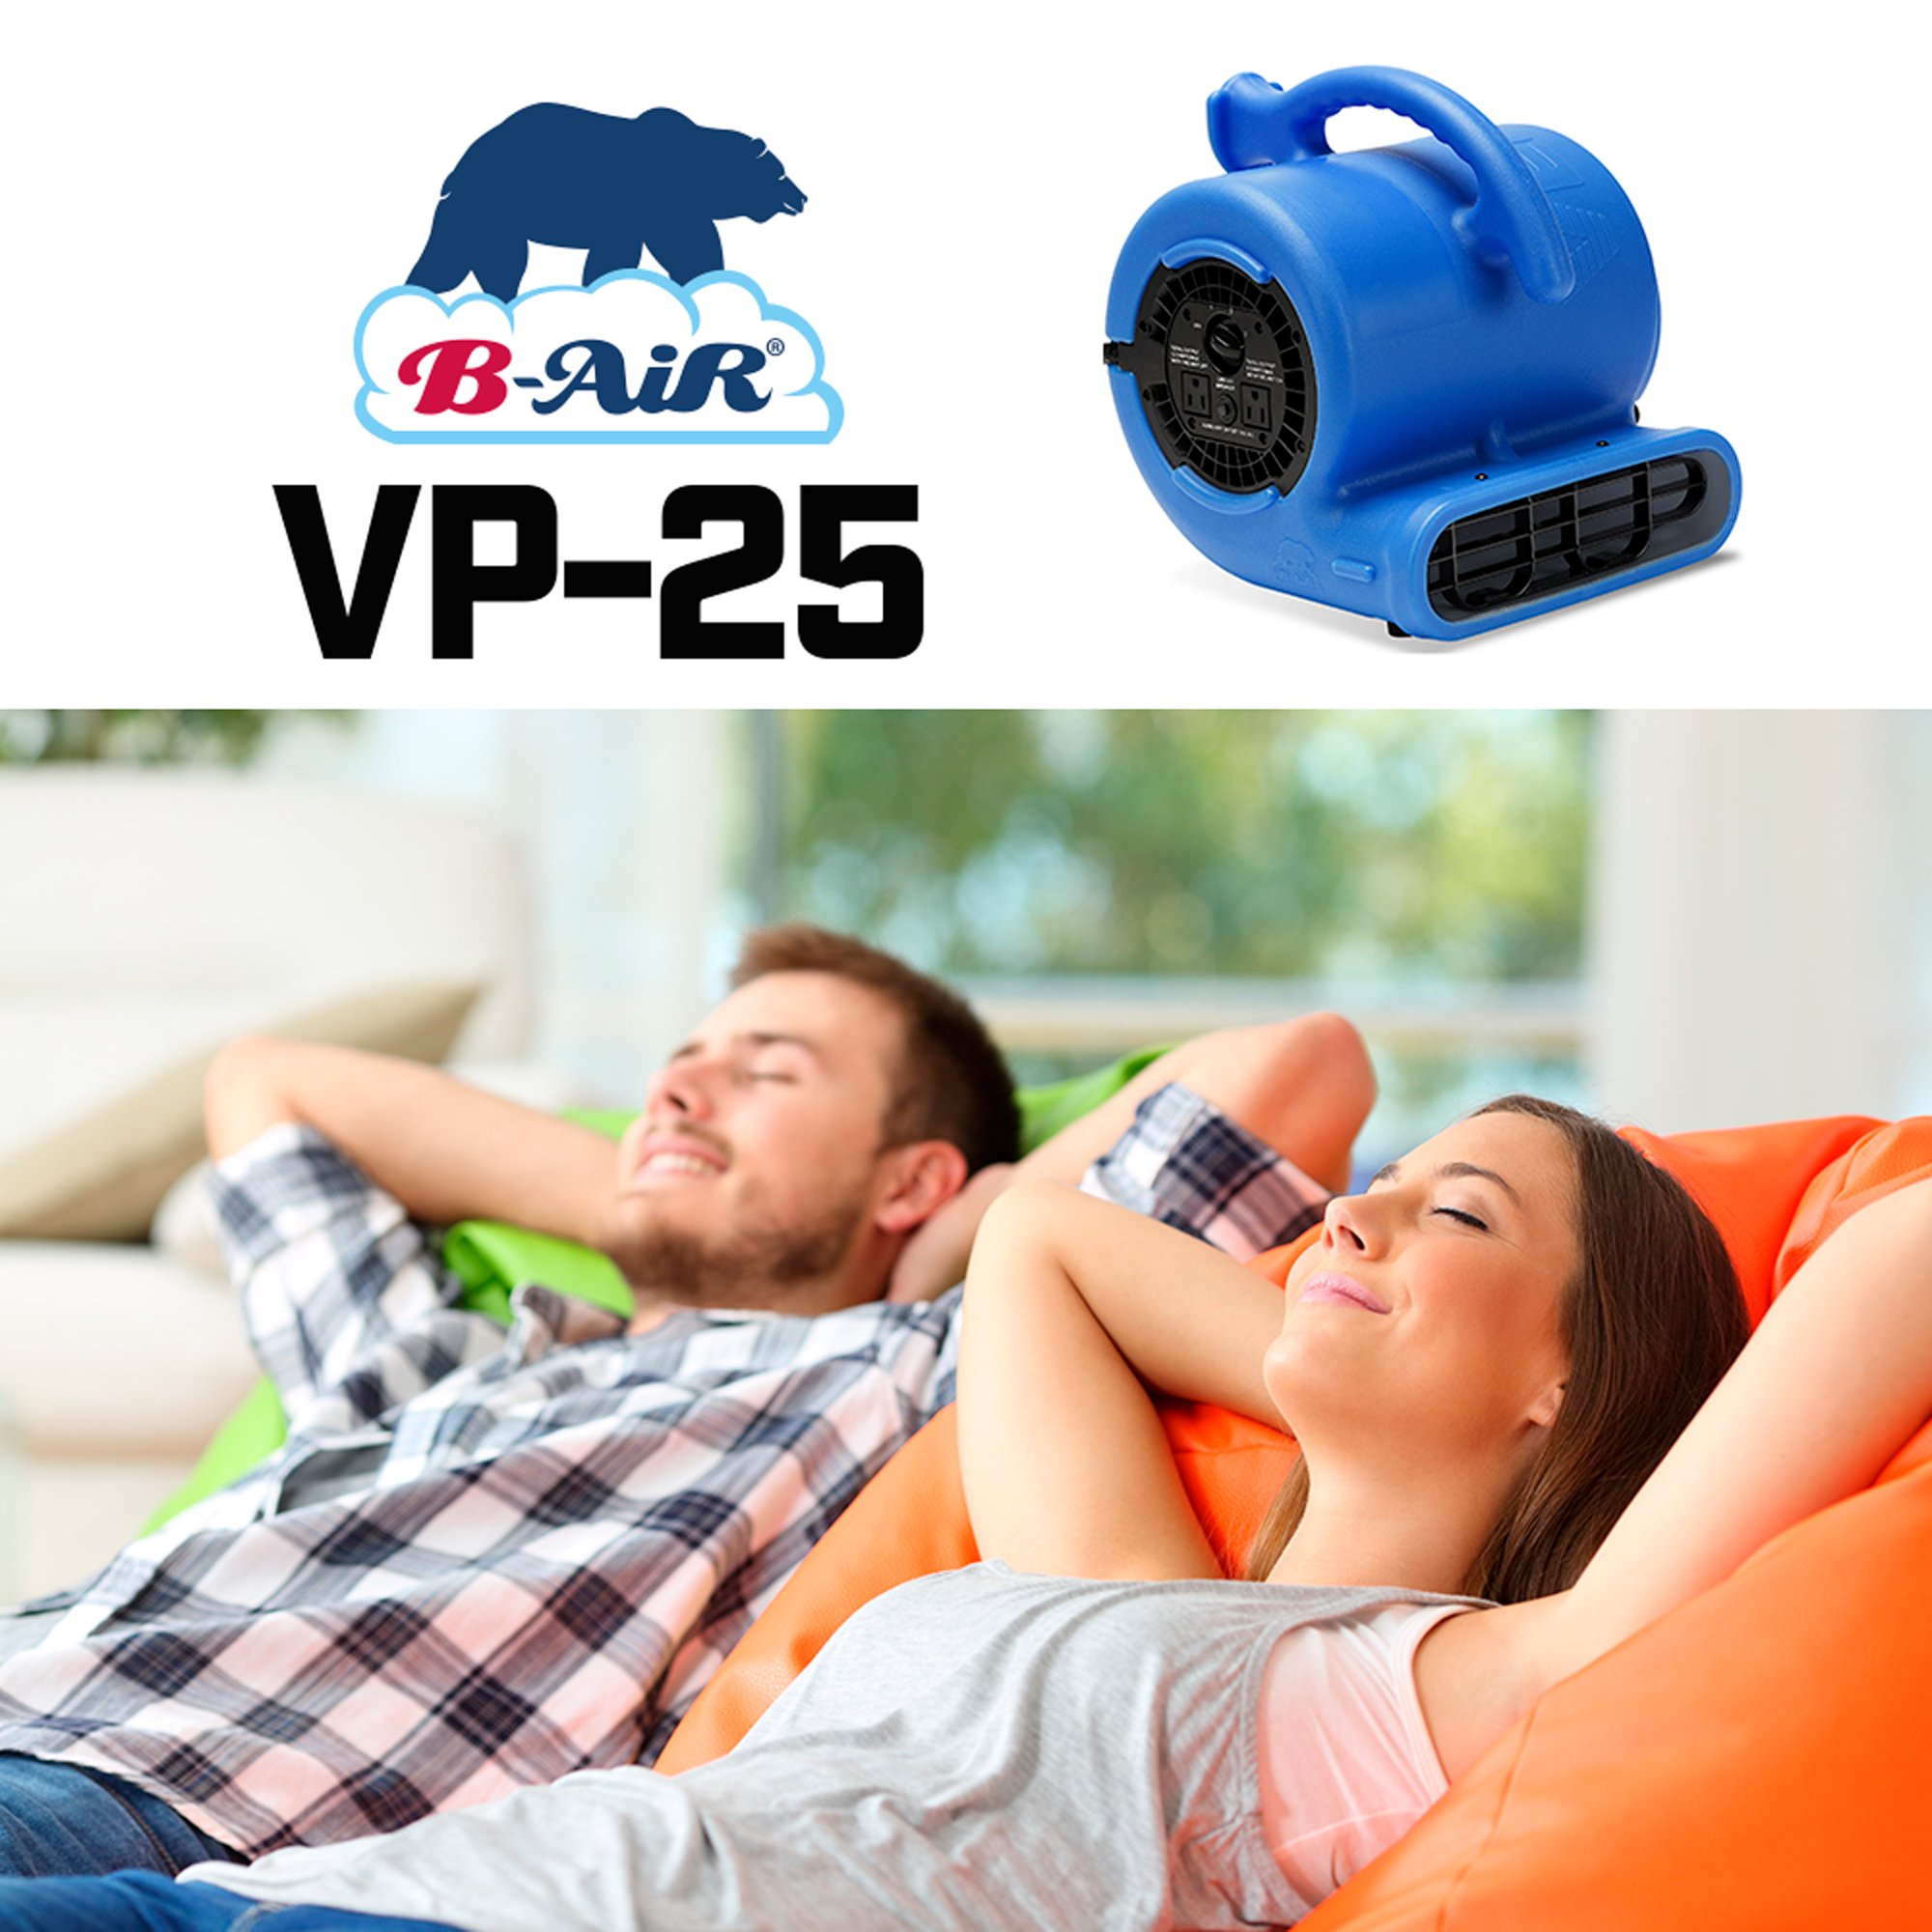 B-Air VP-25 1/4 HP 900 CFM Air Mover for Water Damage Restoration Equipment Carpet Dryer Floor Blower Fan Home and Plumbing Use, Blue